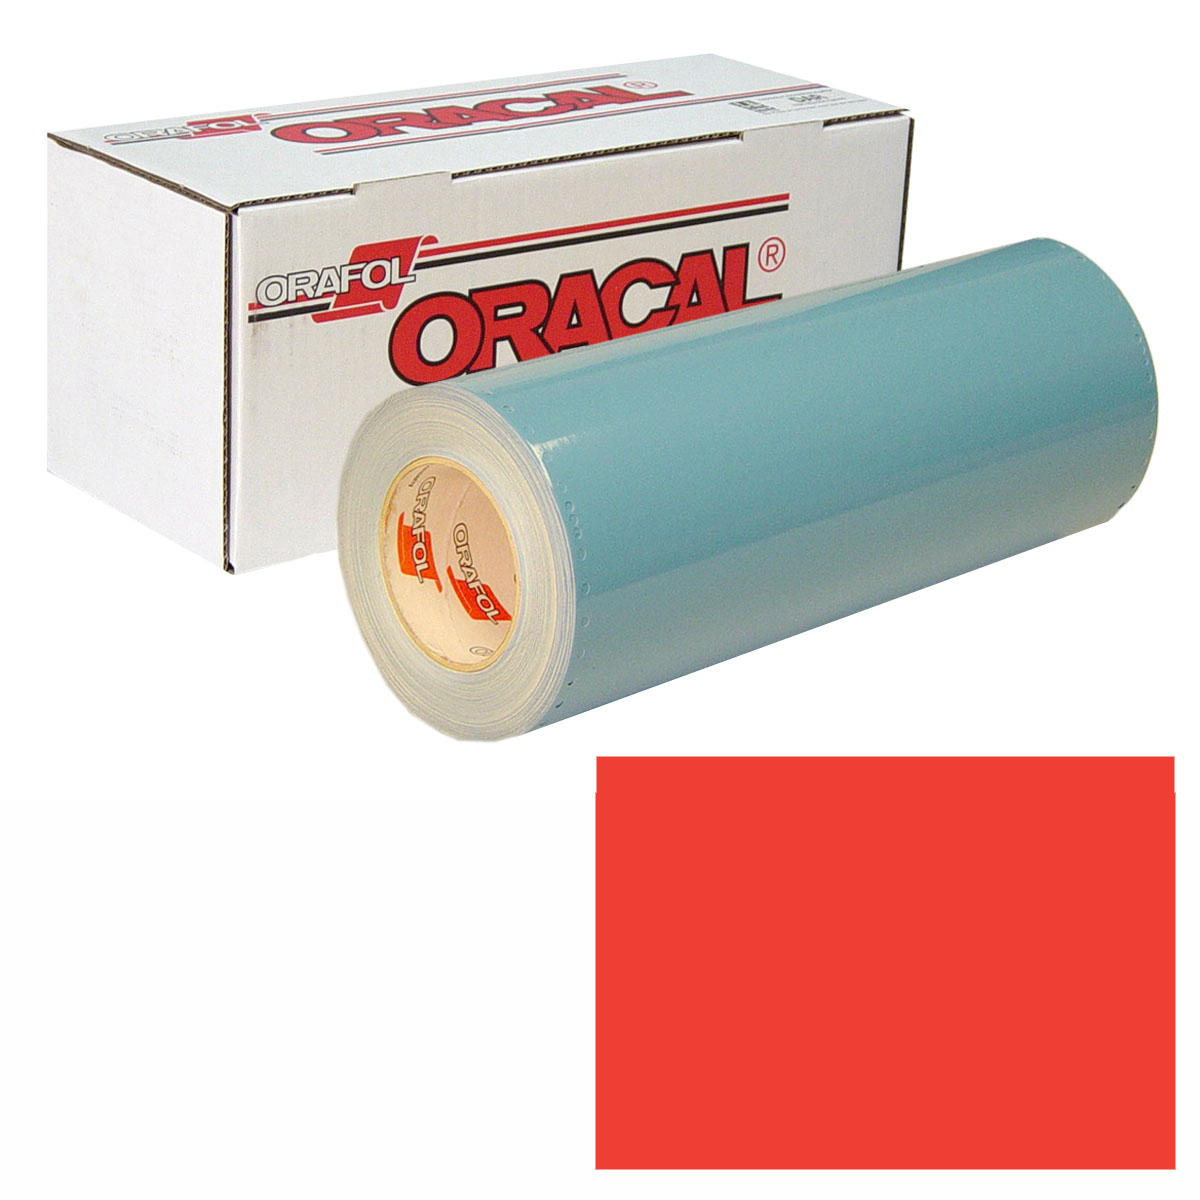 ORACAL 751 30in X 10yd 326 Signal Red